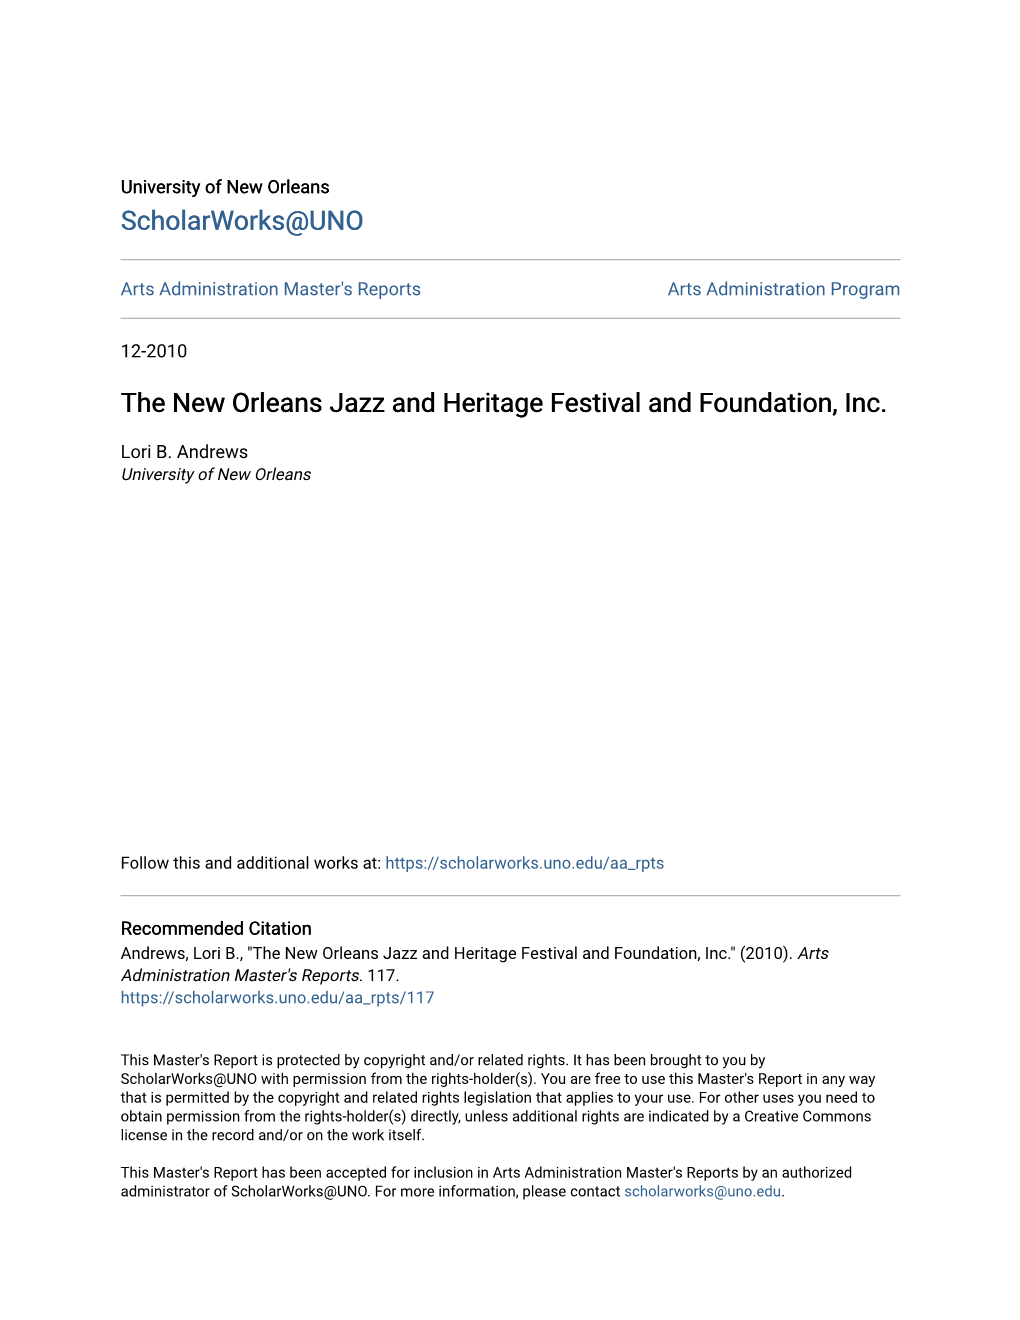 The New Orleans Jazz and Heritage Festival and Foundation, Inc